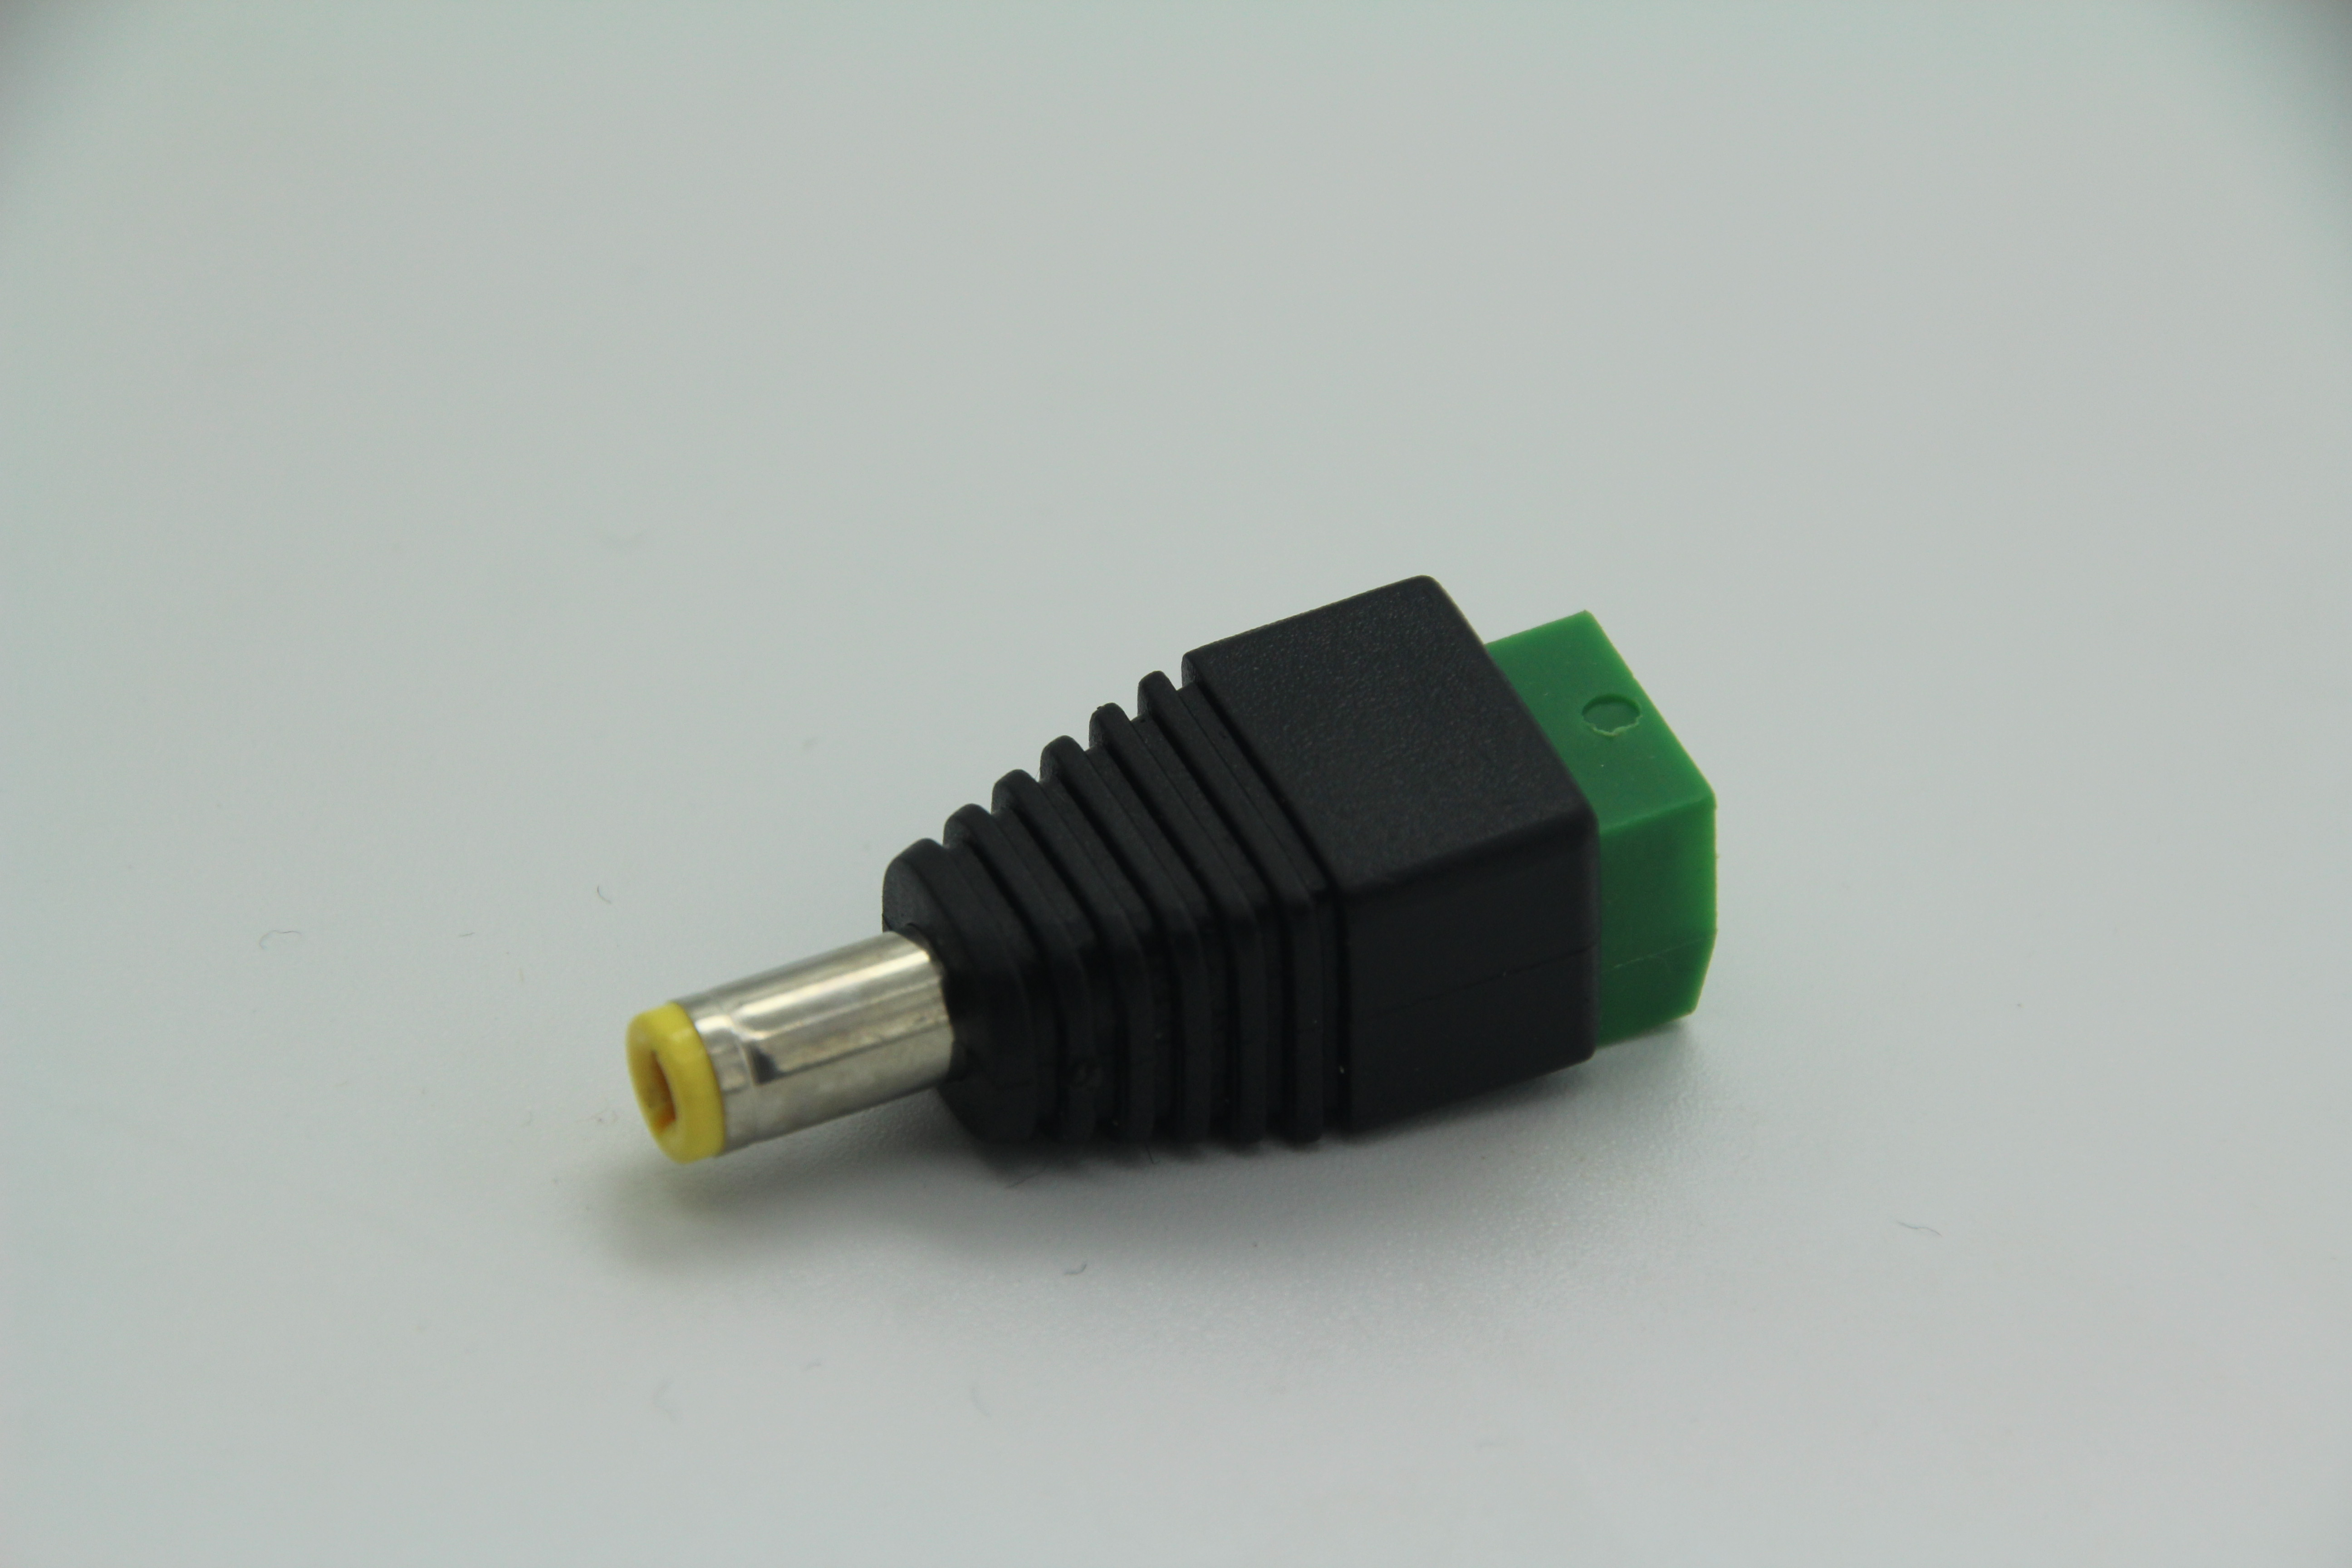 DC YELLOW GLUE ADAPTER MALE MONITORING SOLDERLESS CONNECTOR DC REVOLUTION GREEN TERMINAL DC POWER CONNECTOR